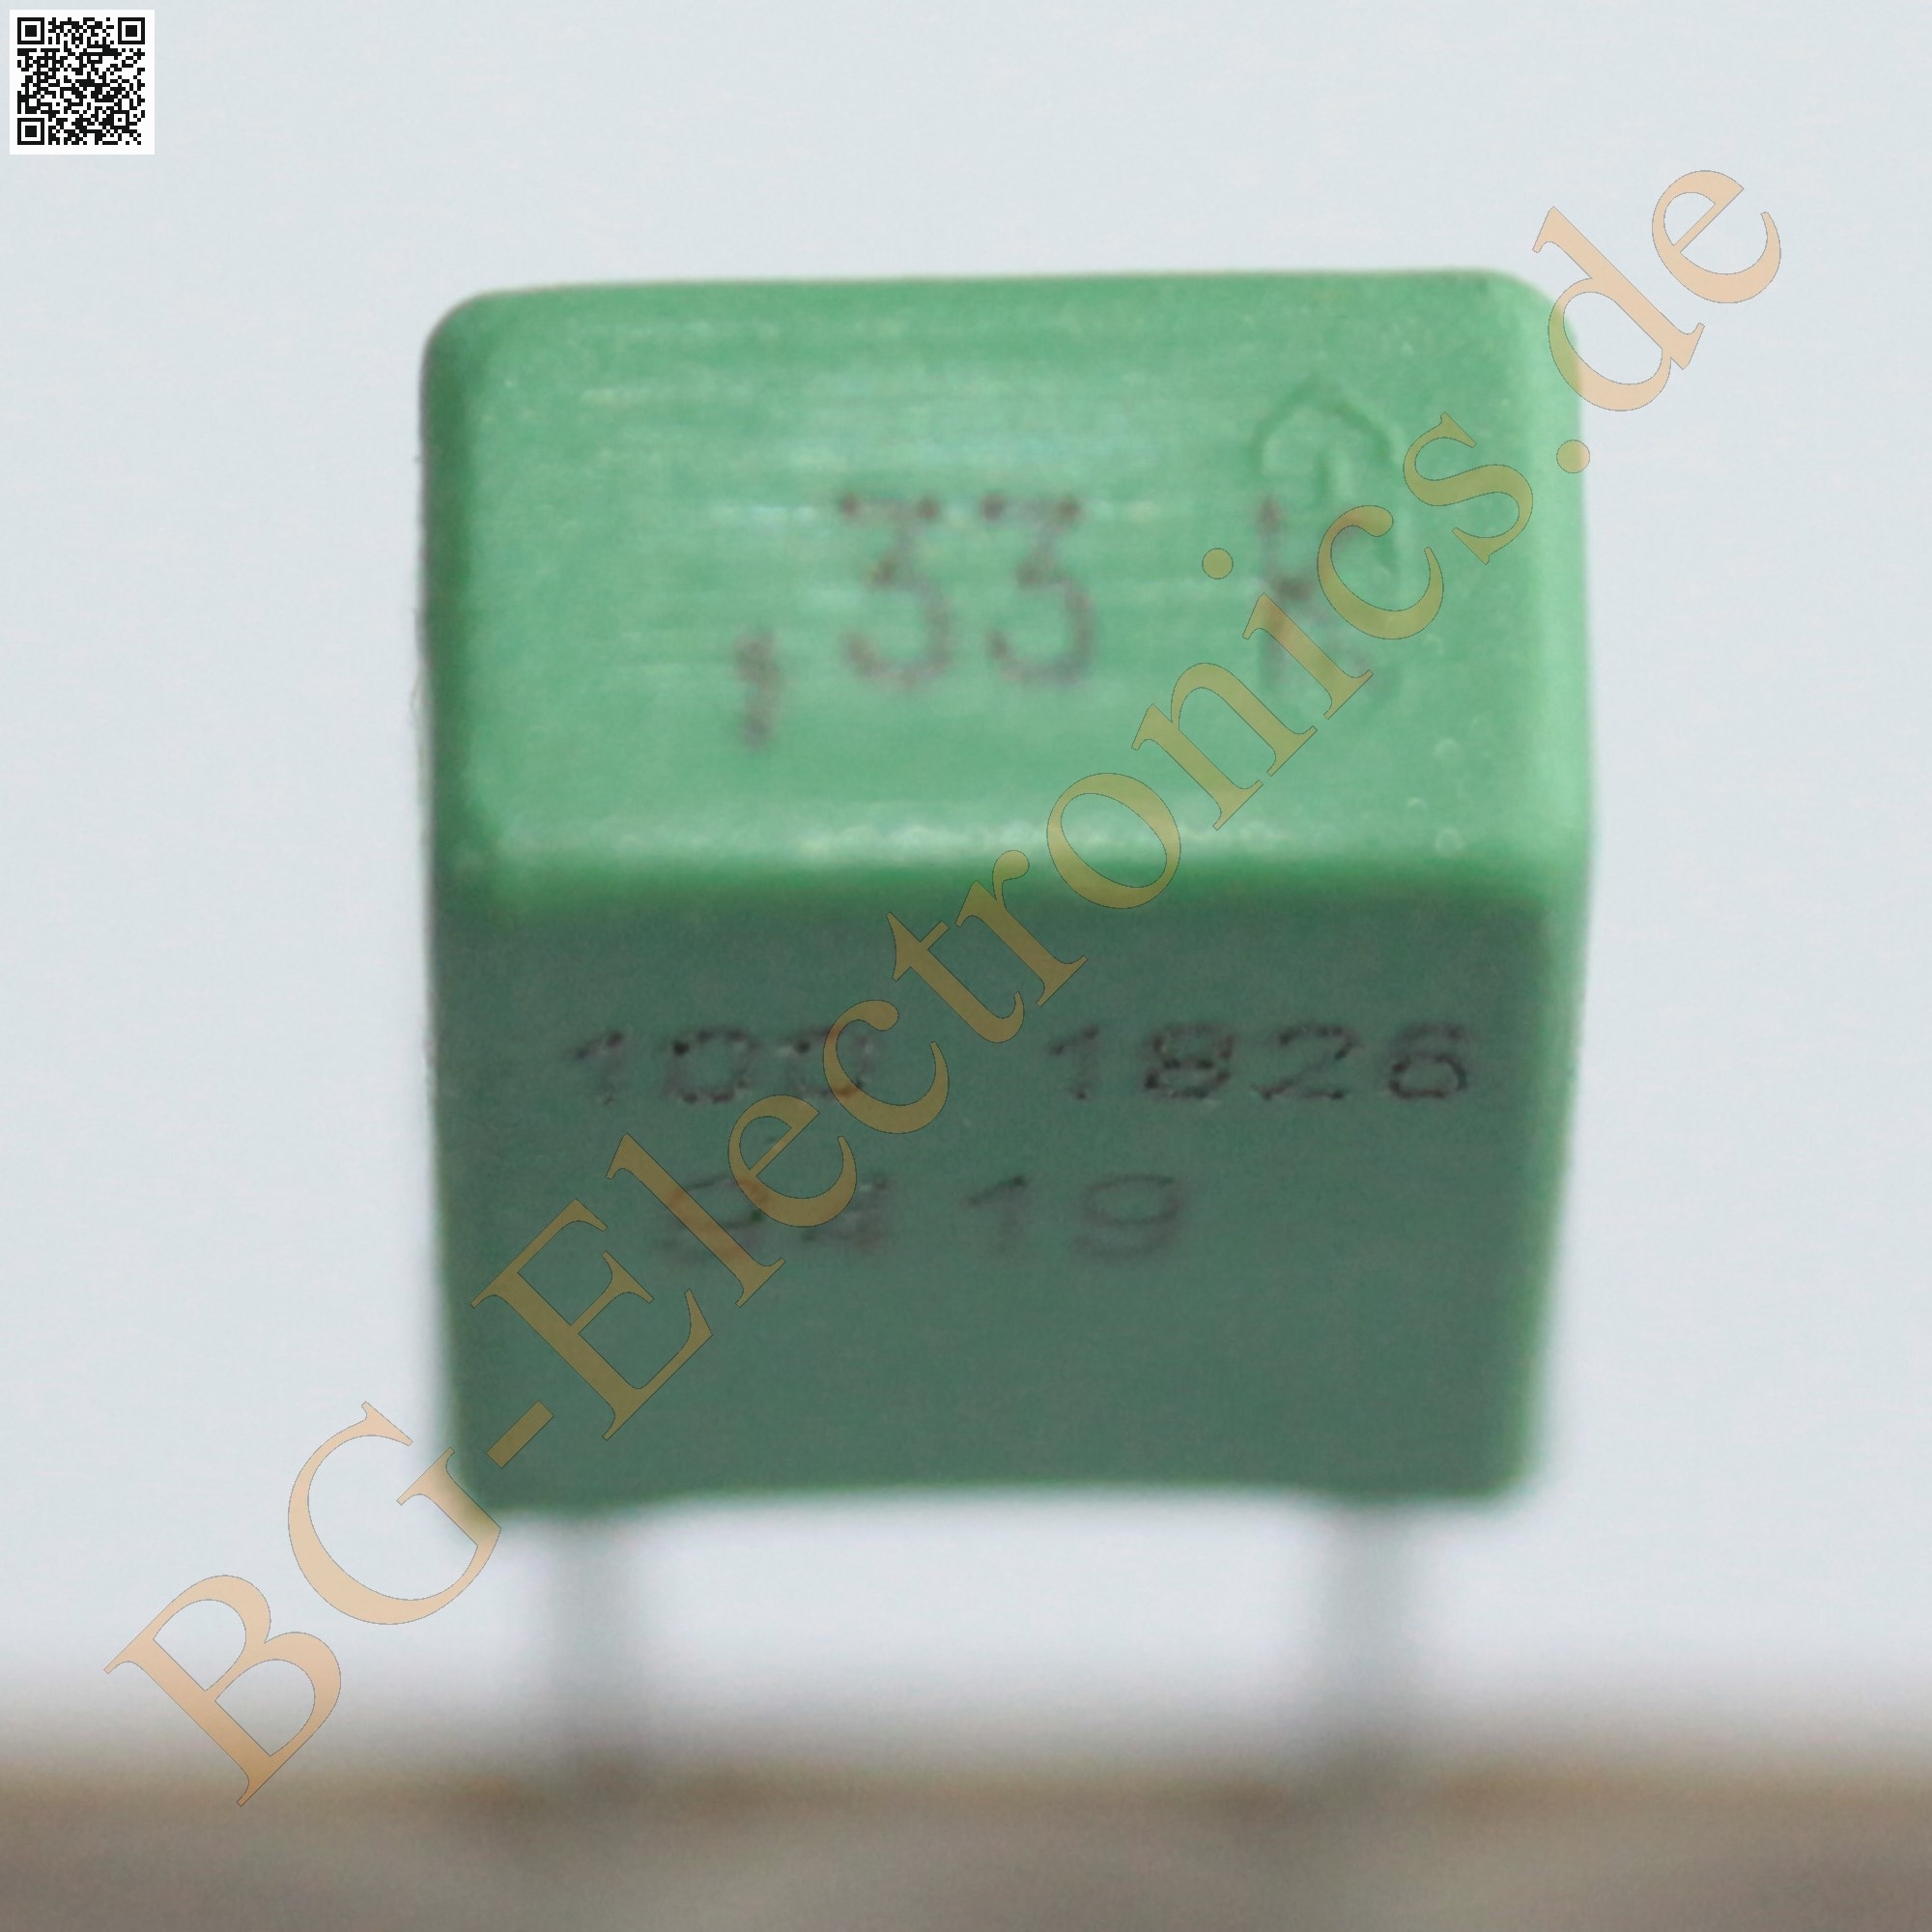 FO-R 330nF / 100V / RM5